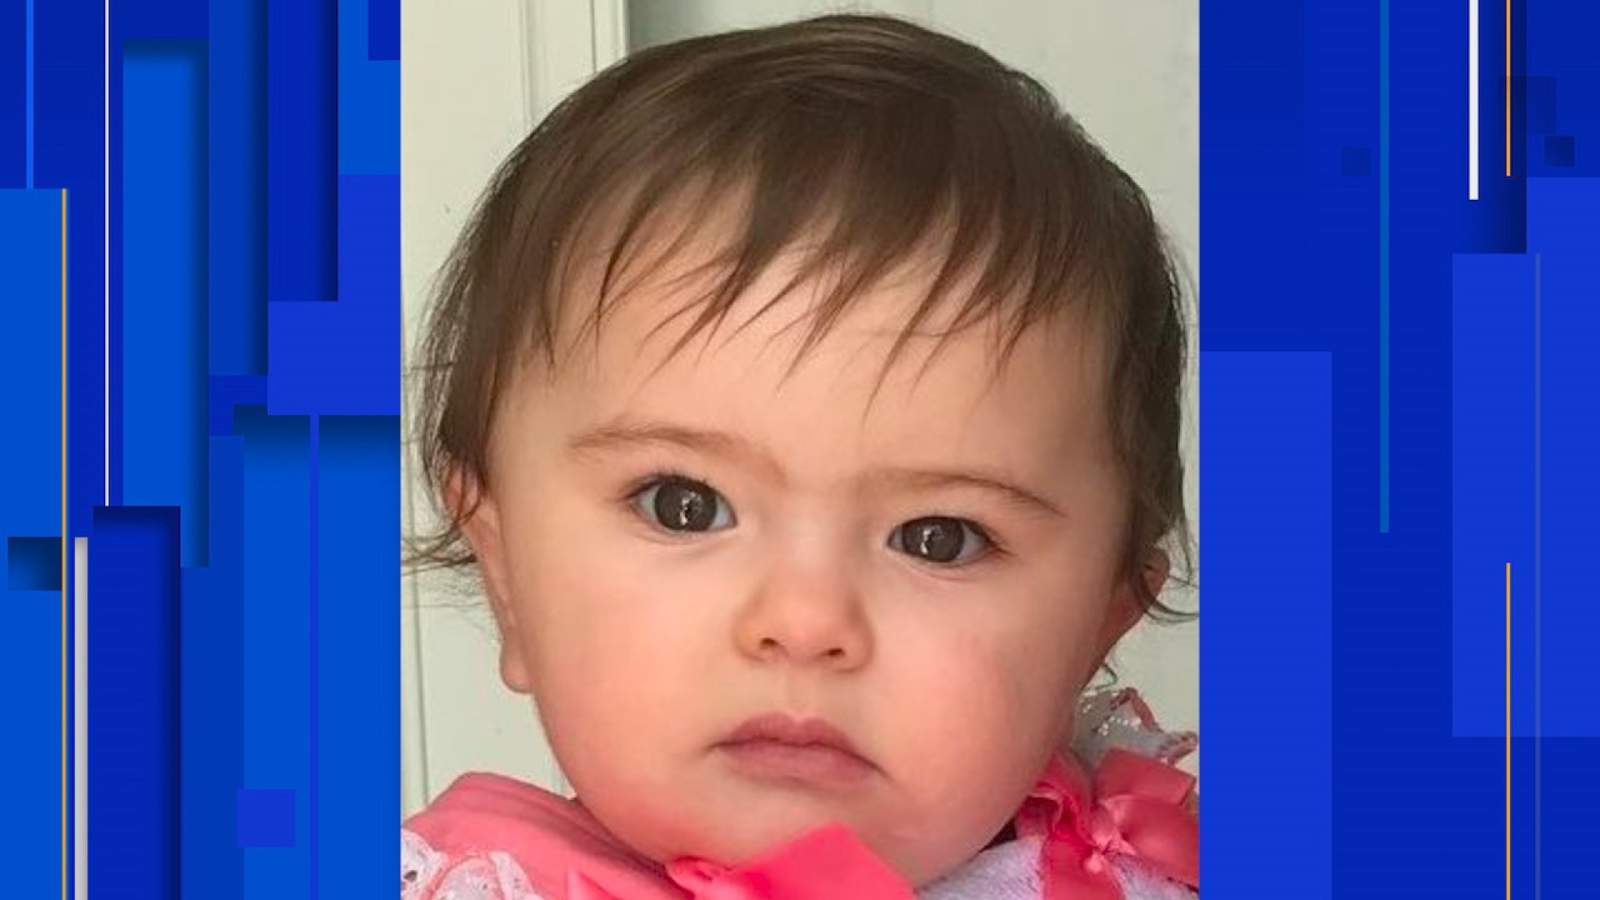 San Antonio police ask for help in search for missing 10-month old girl